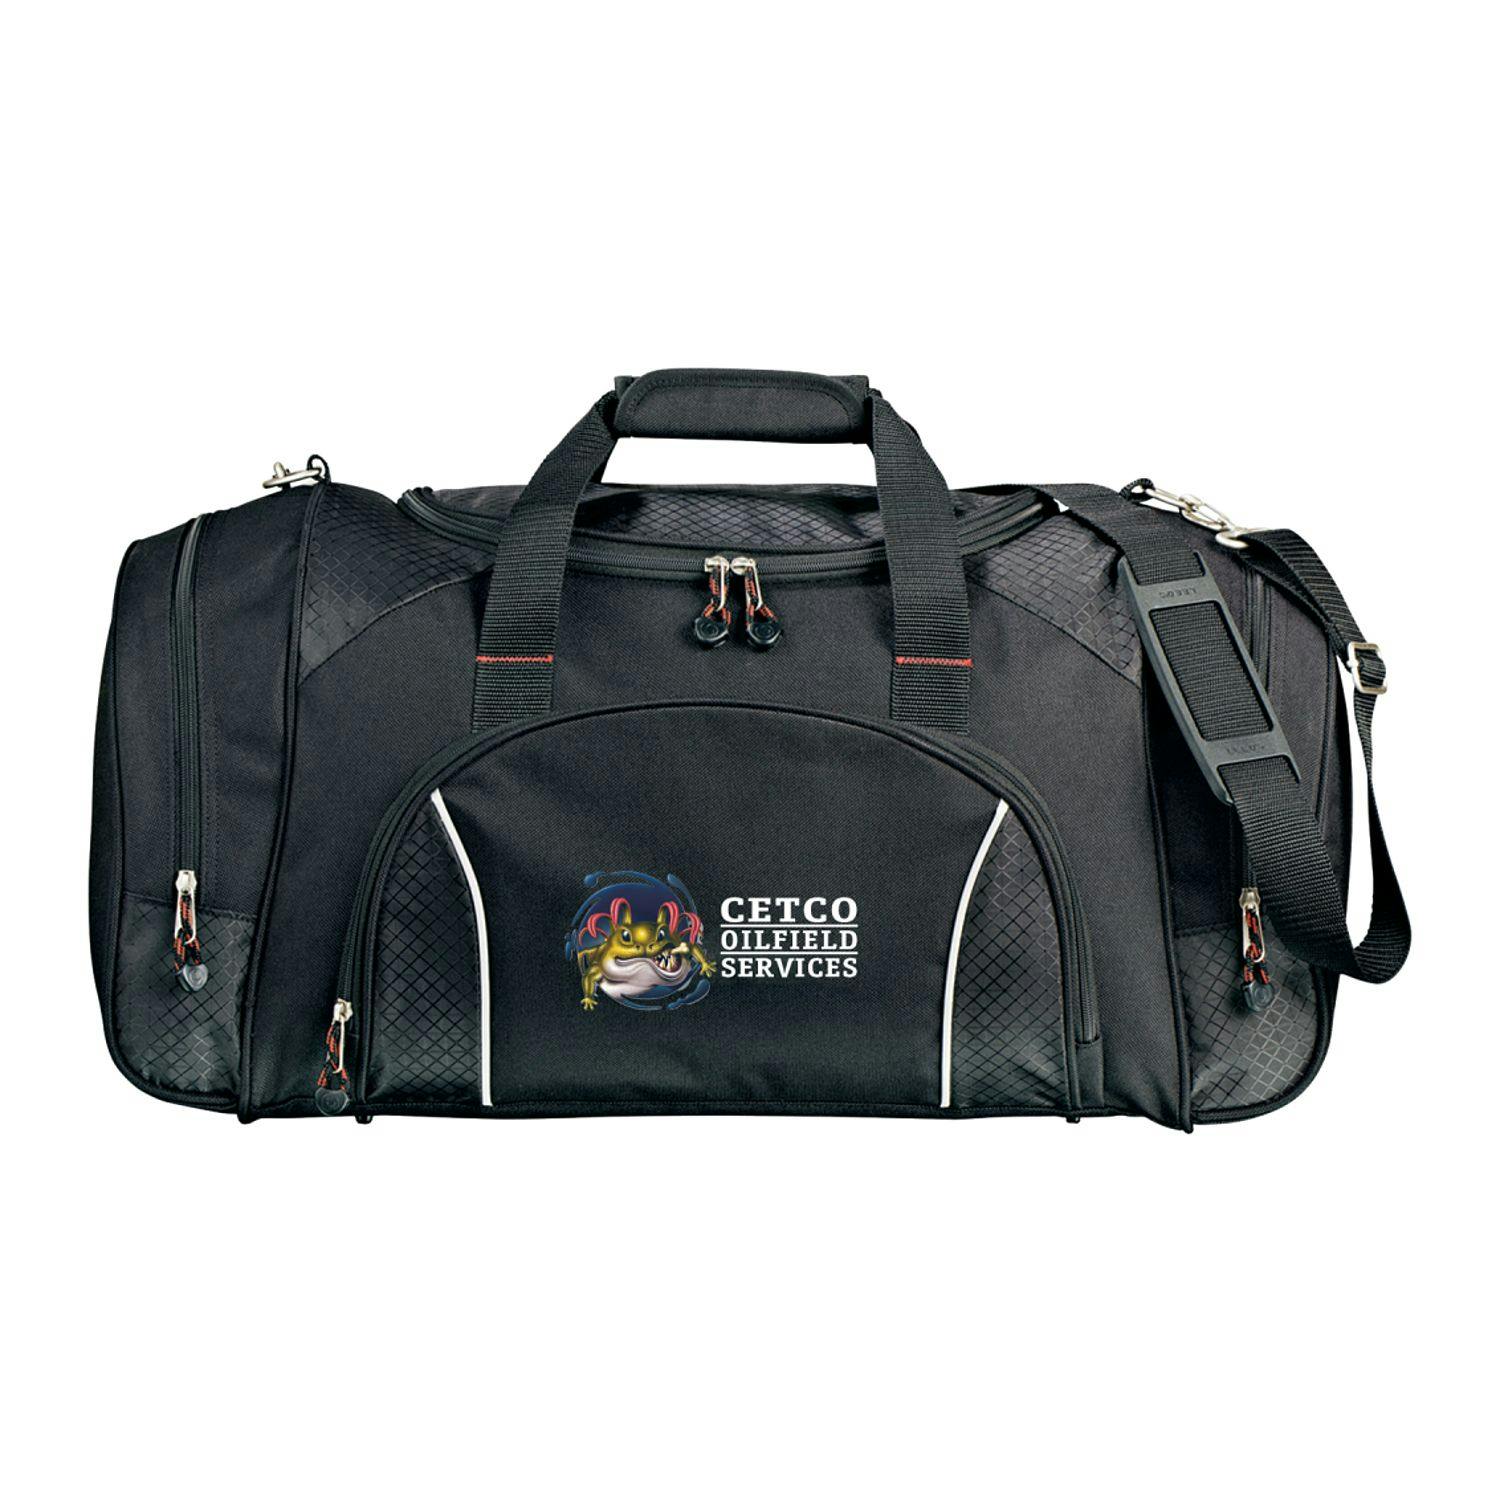 Triton Weekender 24" Carry-All Duffel Bag - additional Image 1